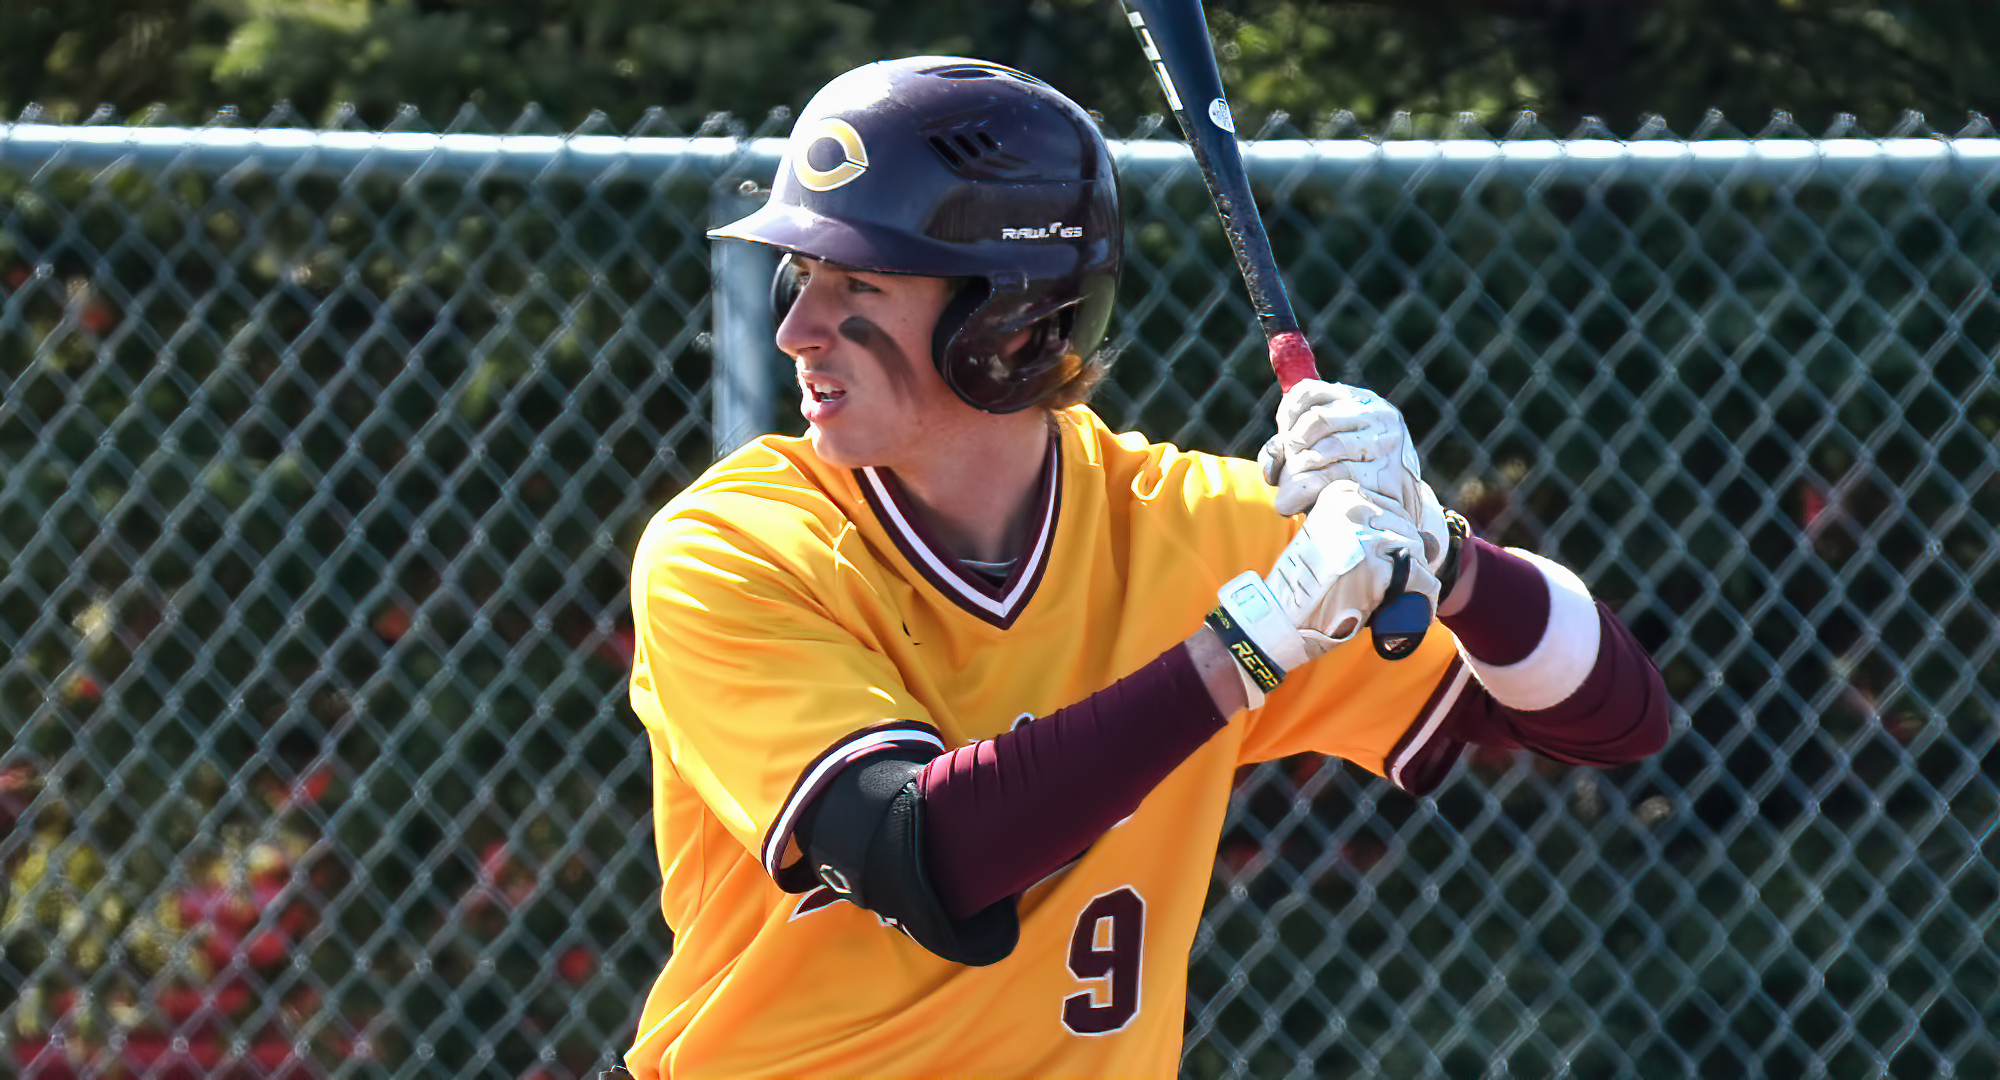 Thomas Horan went 3-for-4 in the opener of the Cobbers' sweep at Carleton to become the 29th player in program history to reach the 100-hit mark.